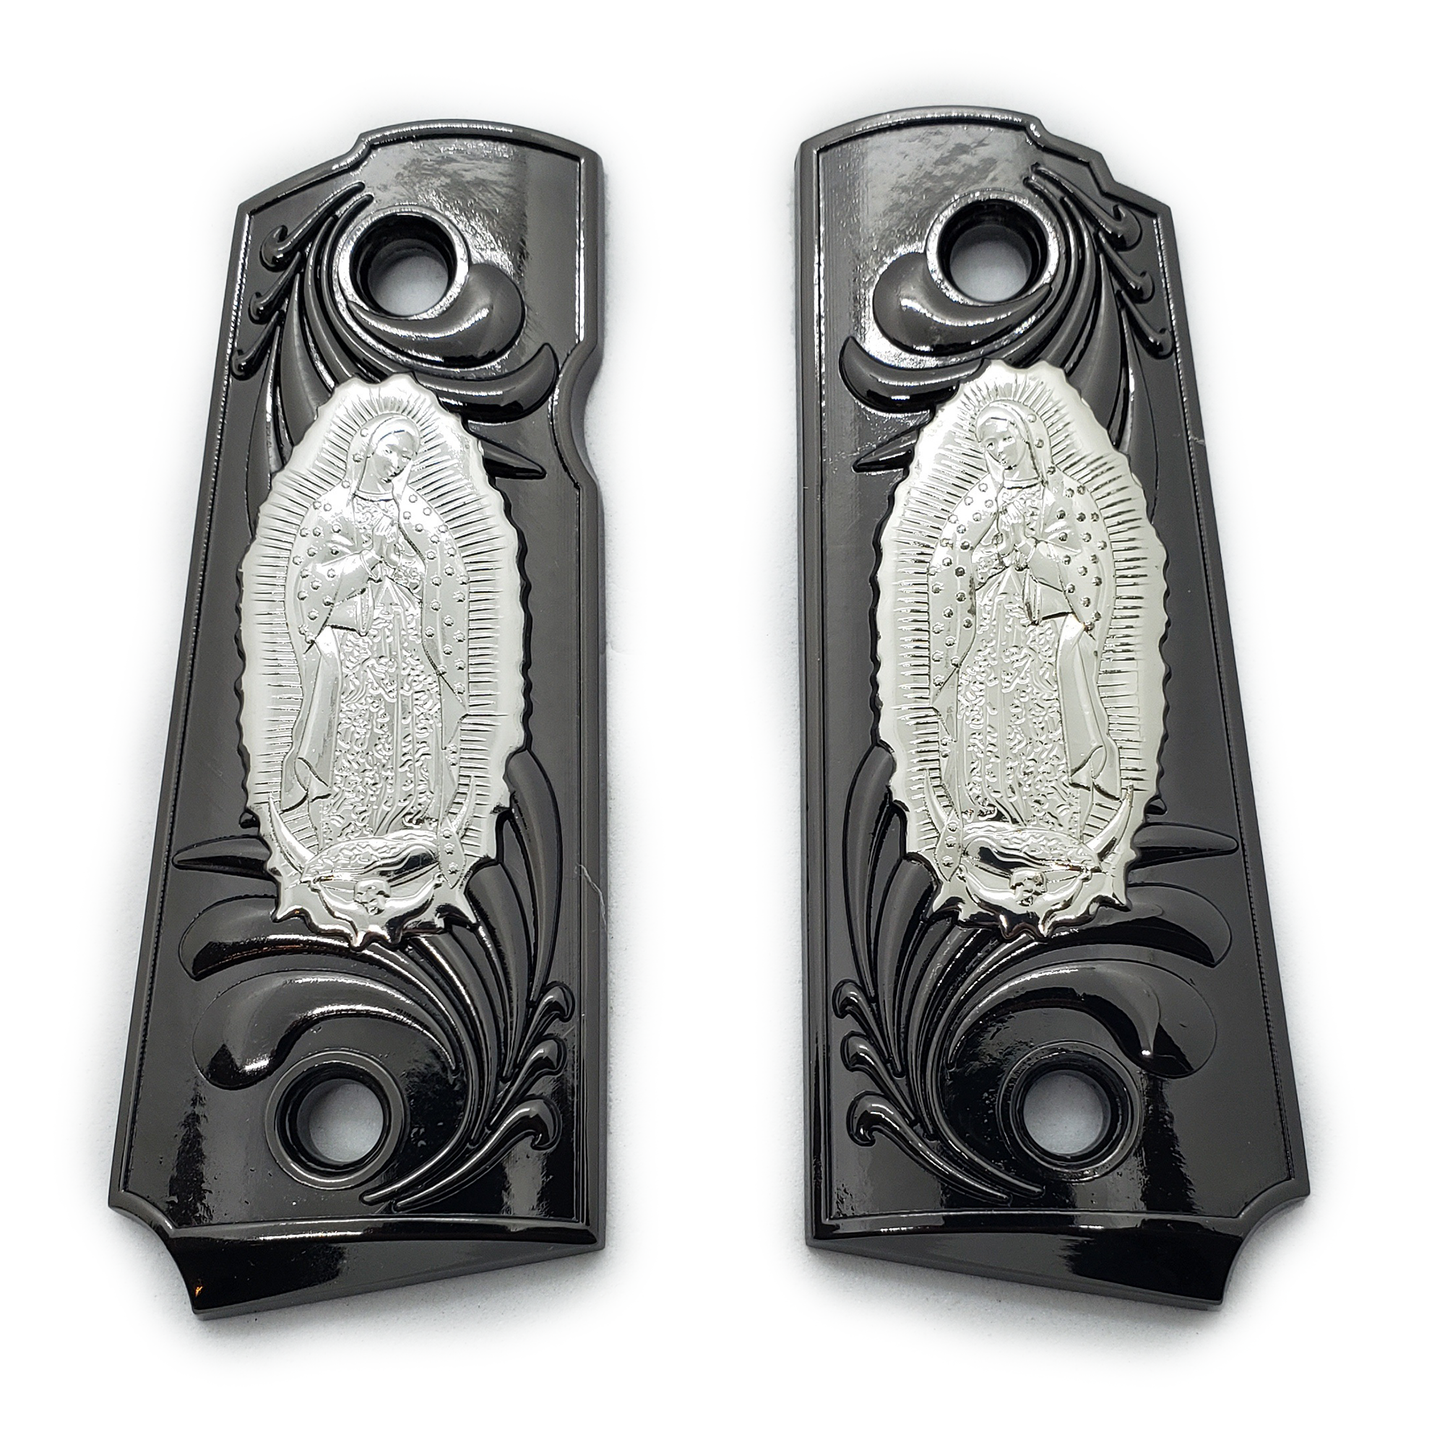 1911 Grips Compact Officer Size  Virgin Mary Black Gold